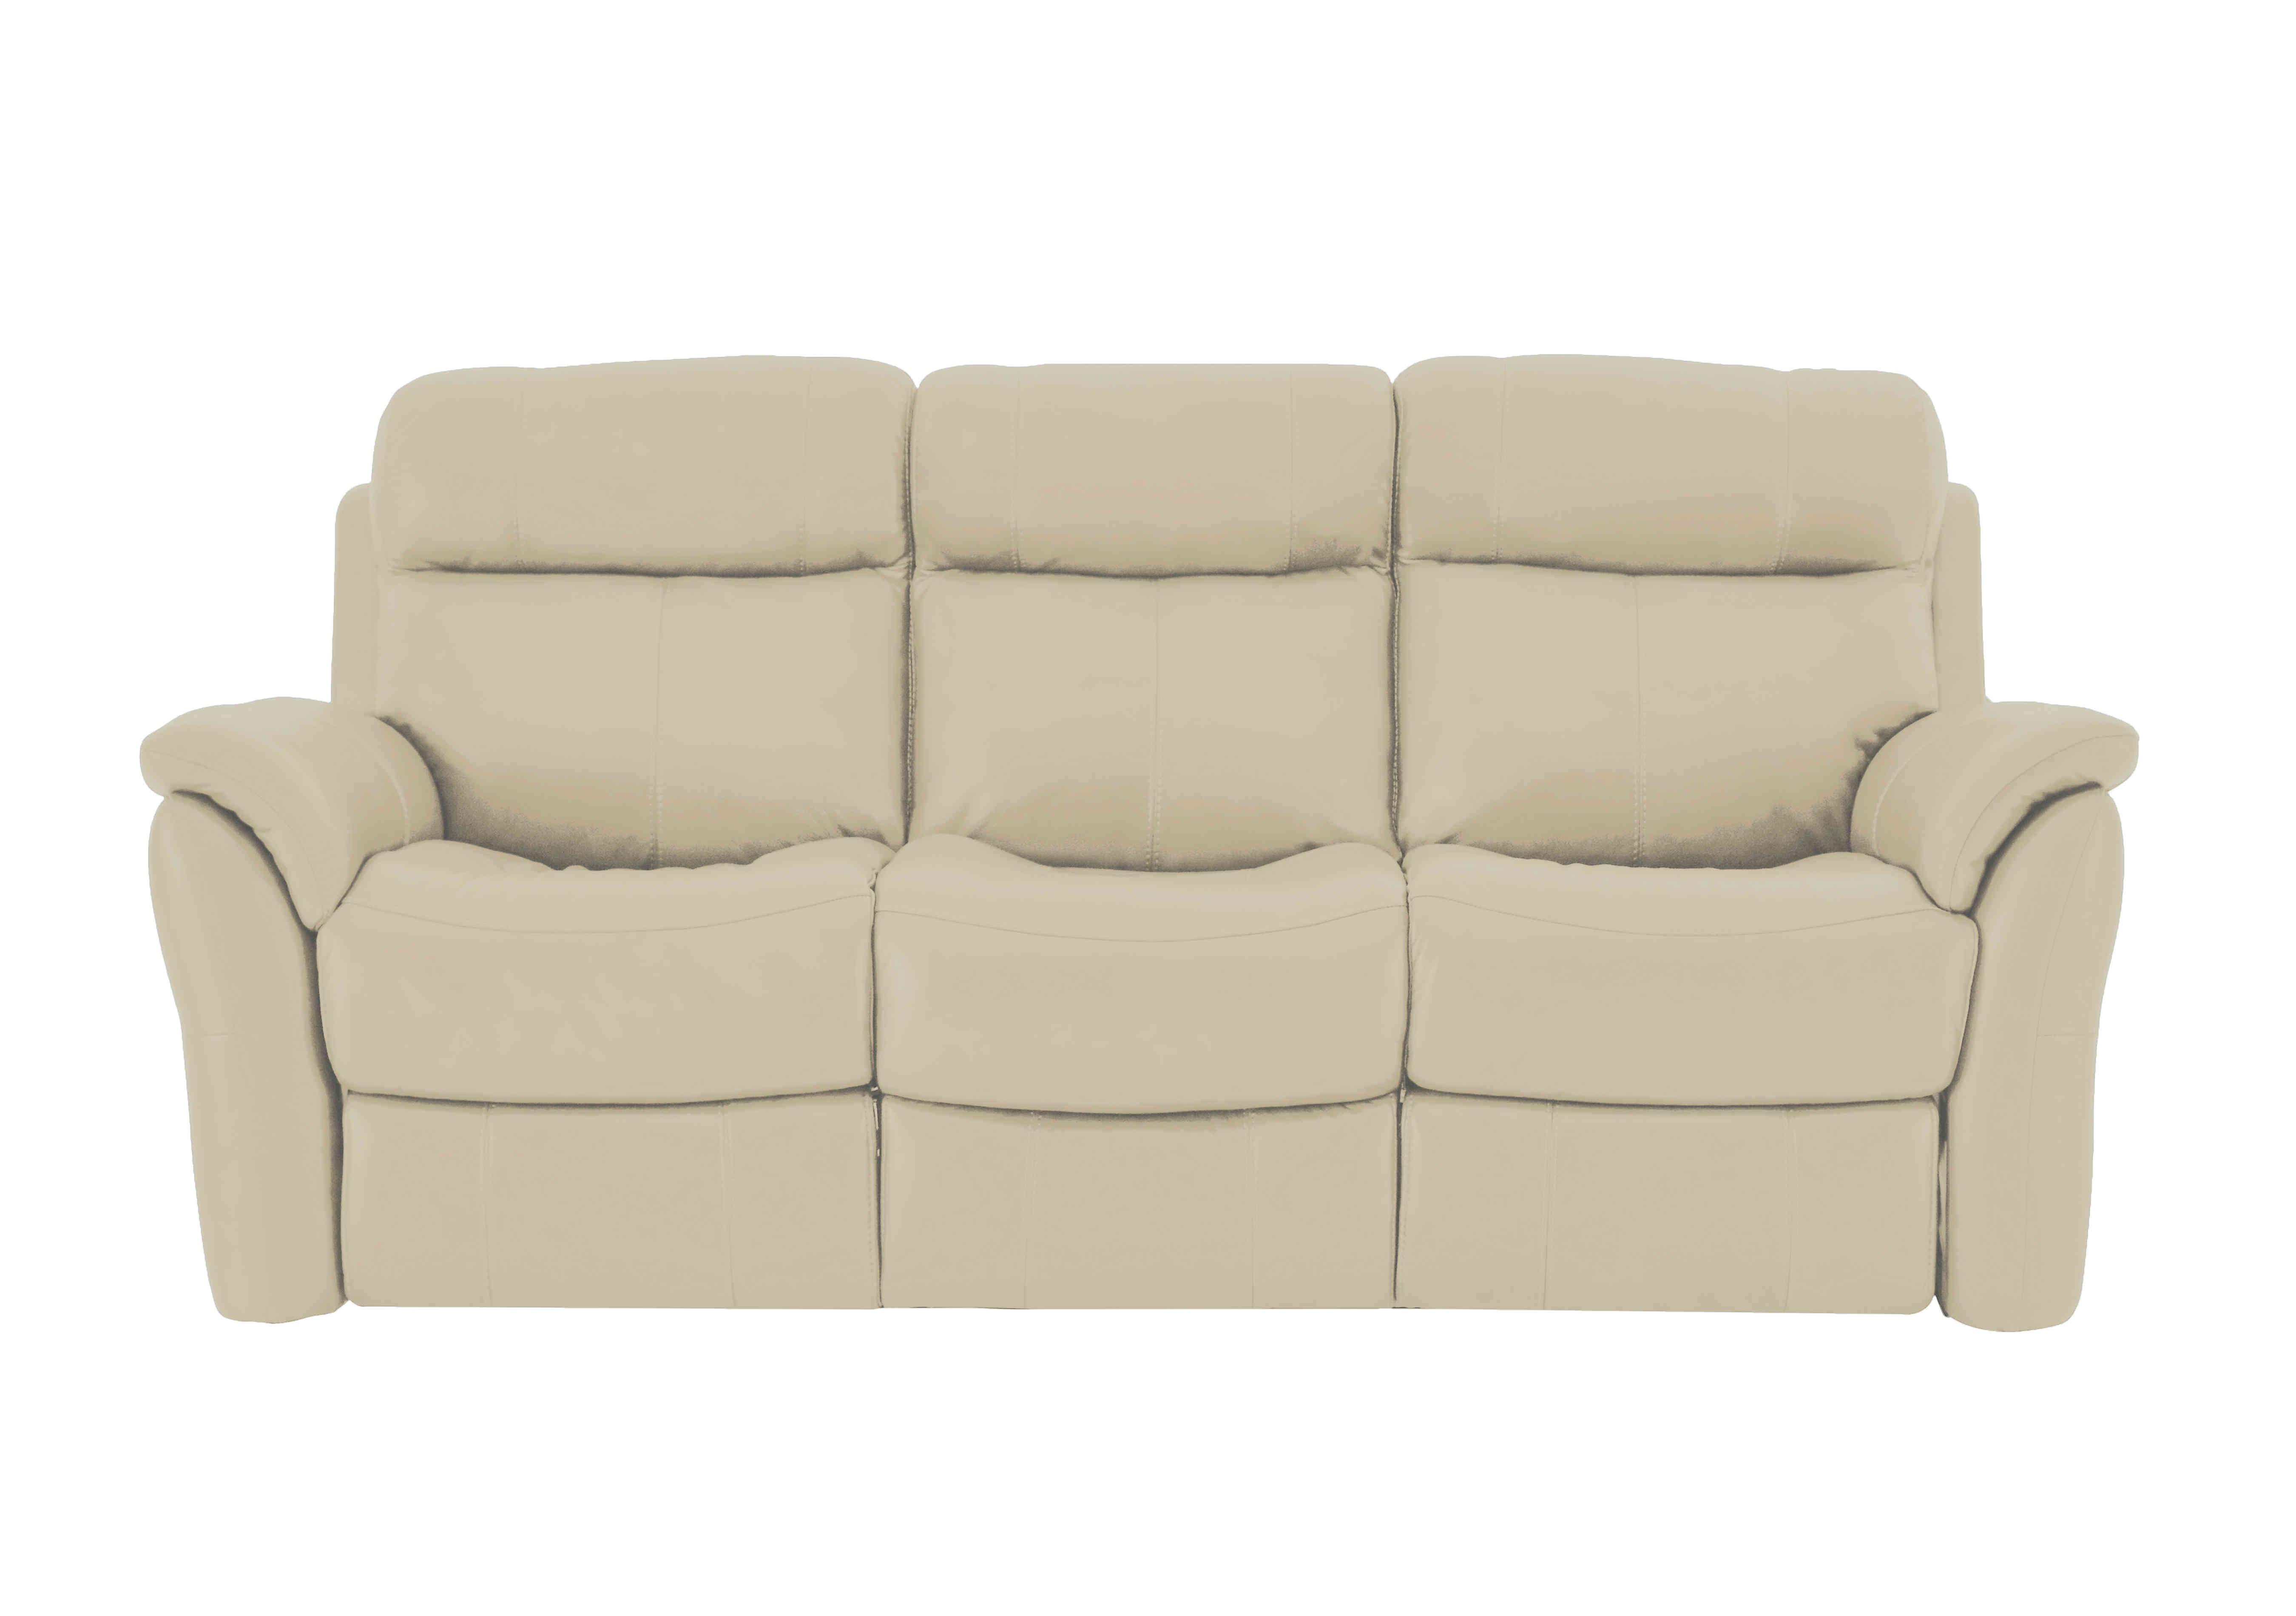 Relax Station Revive 3 Seater Leather Sofa in Bv-862c Bisque on Furniture Village